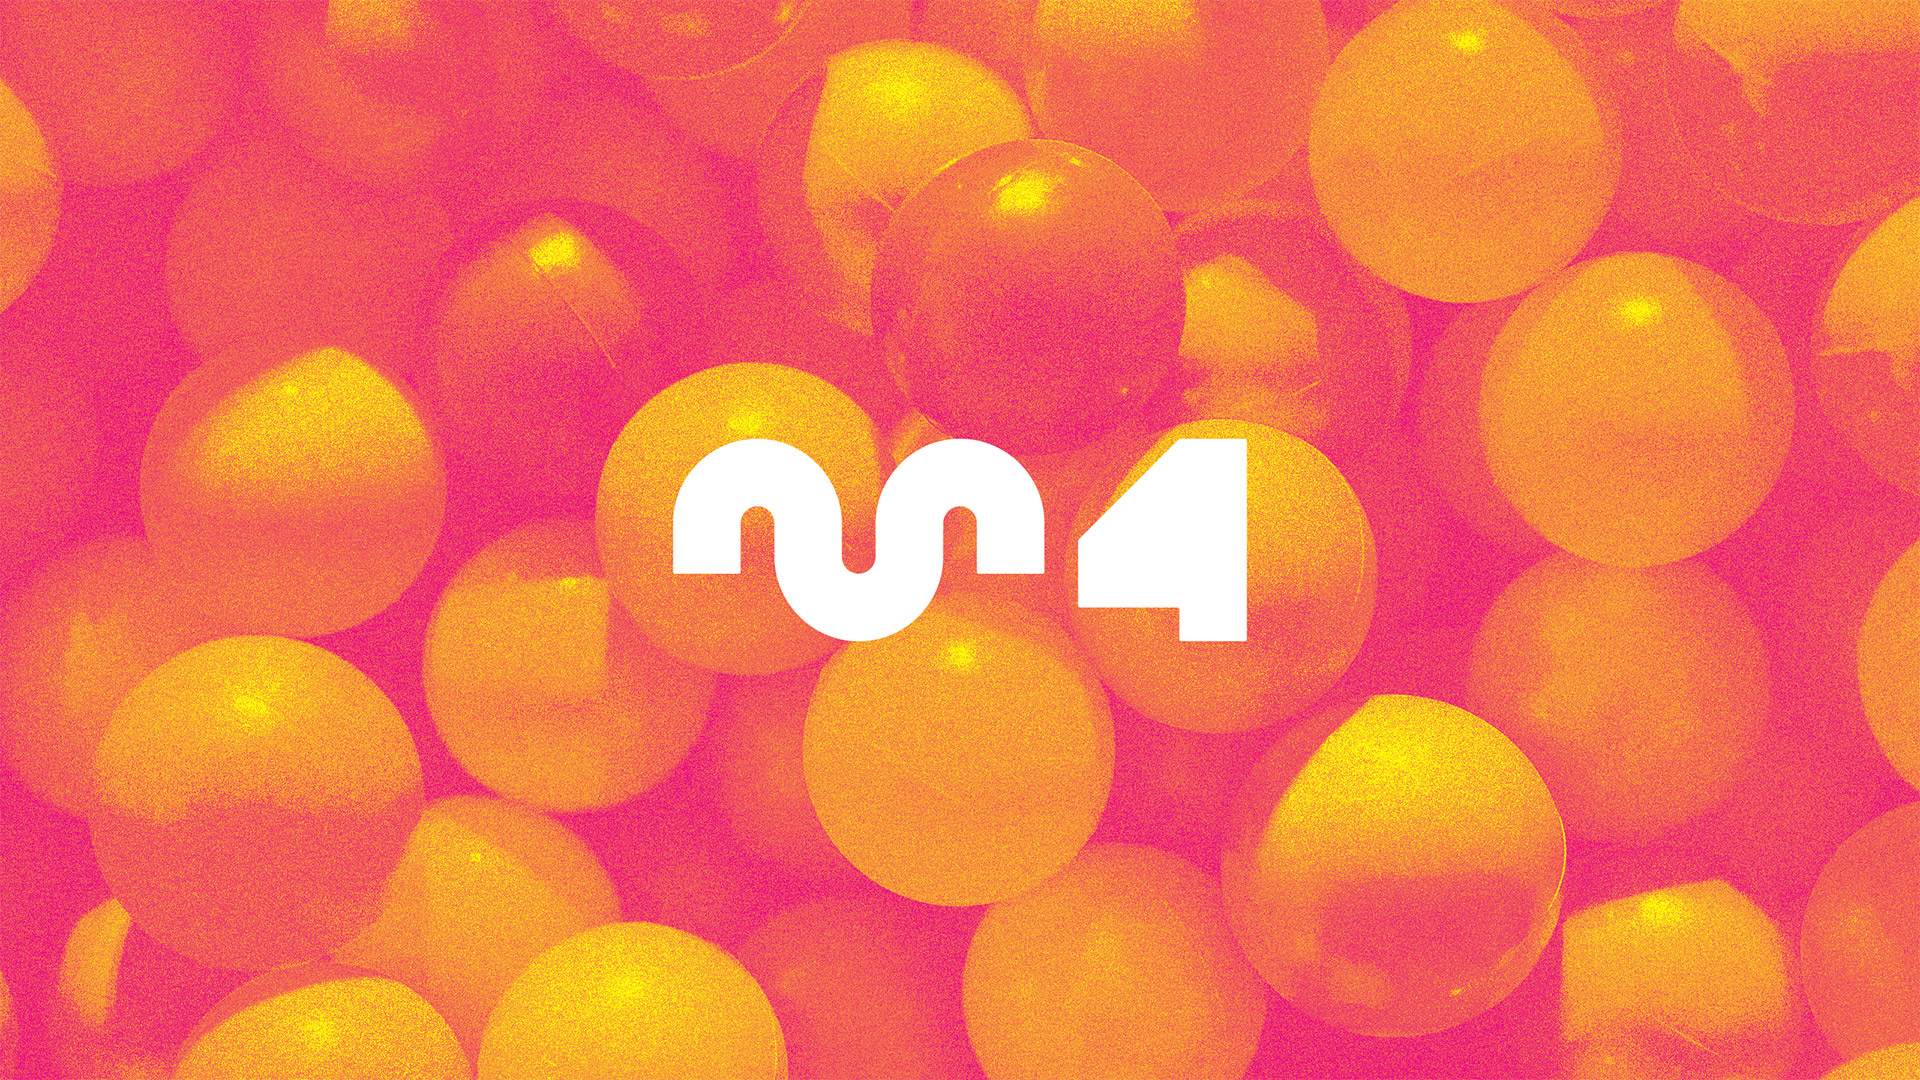 An abstract, symbol-based logomark featuring a one-and-a-half-cycle segment of a sine wave, and an abstract digit ‘4’; laid over a magenta-yellow duotone background.